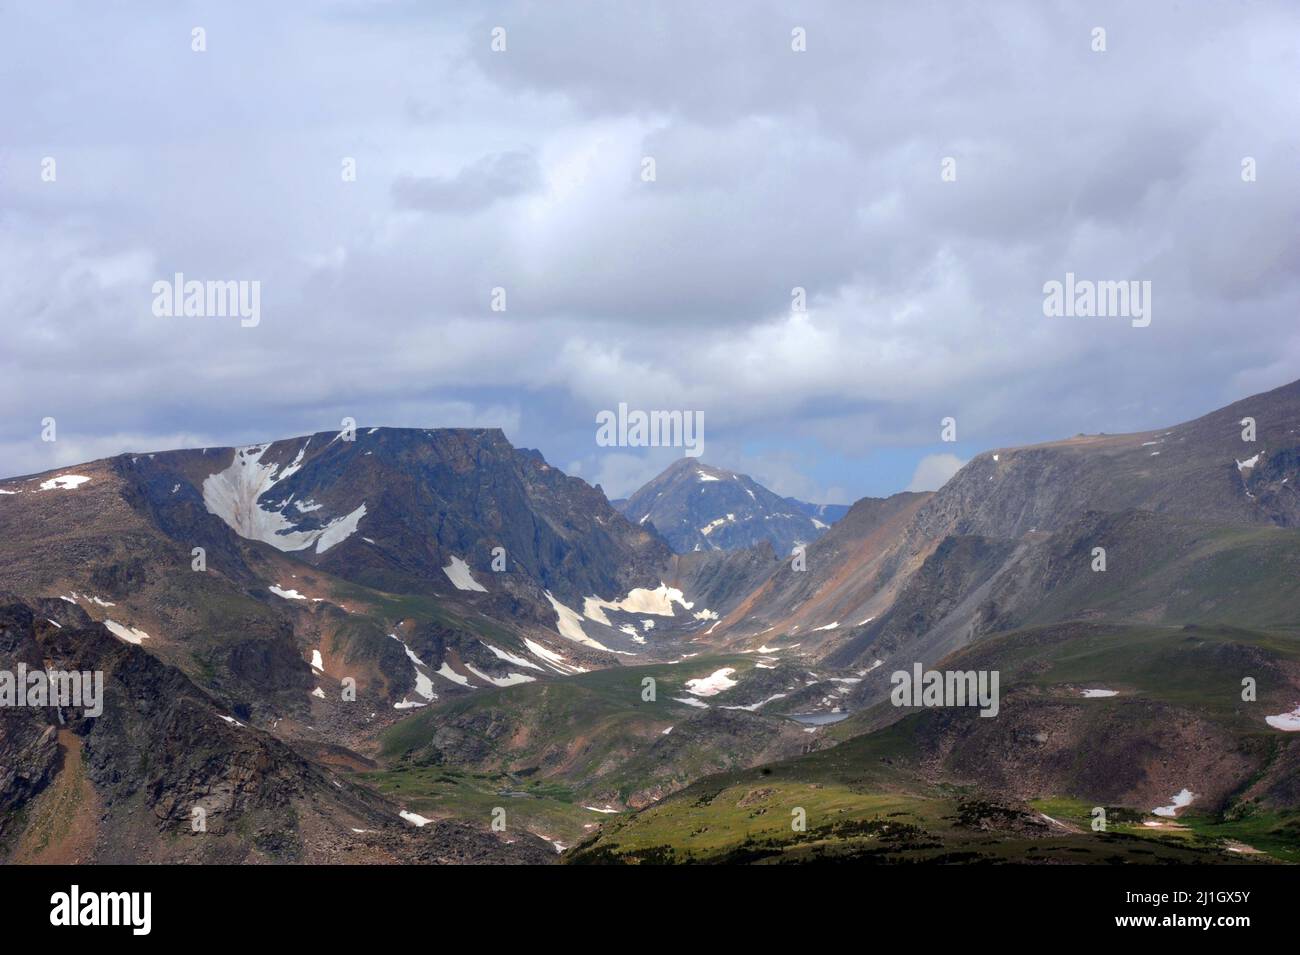 Rugged mountains and snow encrusted peaks, are part of the scenery on Beartooth Pass, in Wyoming. Stock Photo